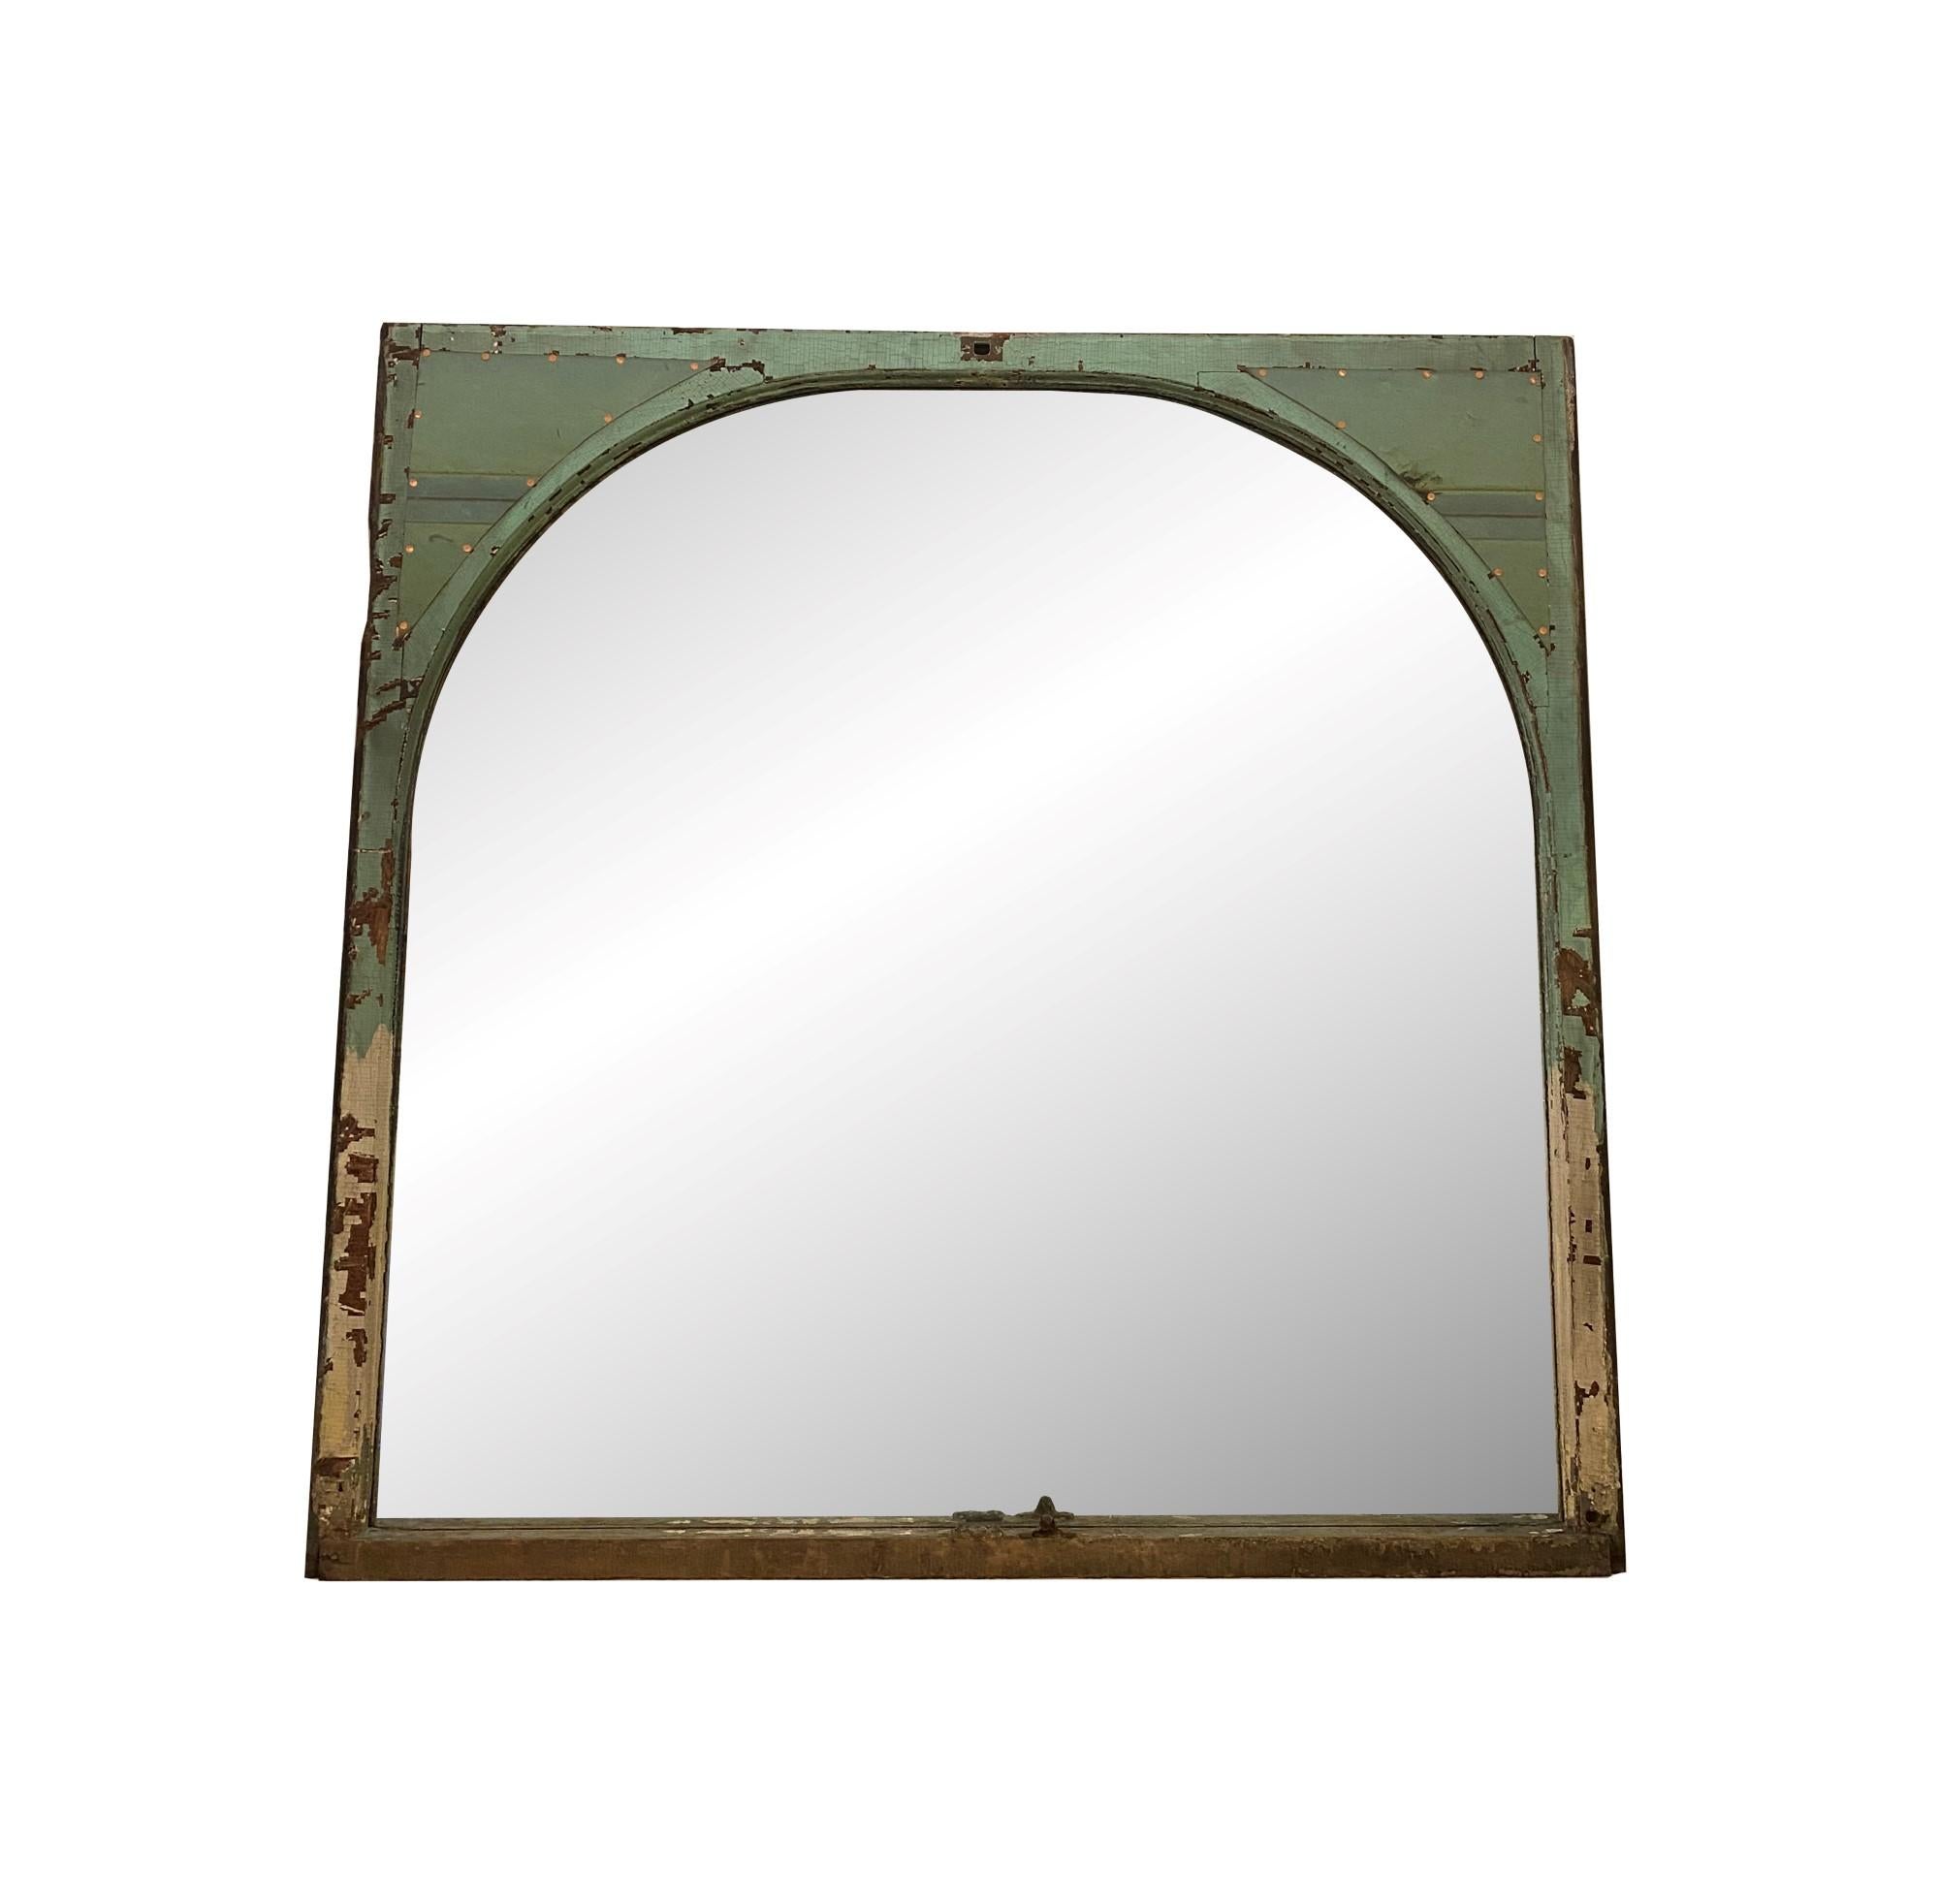 20th Century Early 20th C. Arched Wood Window Mirror with Copper Details